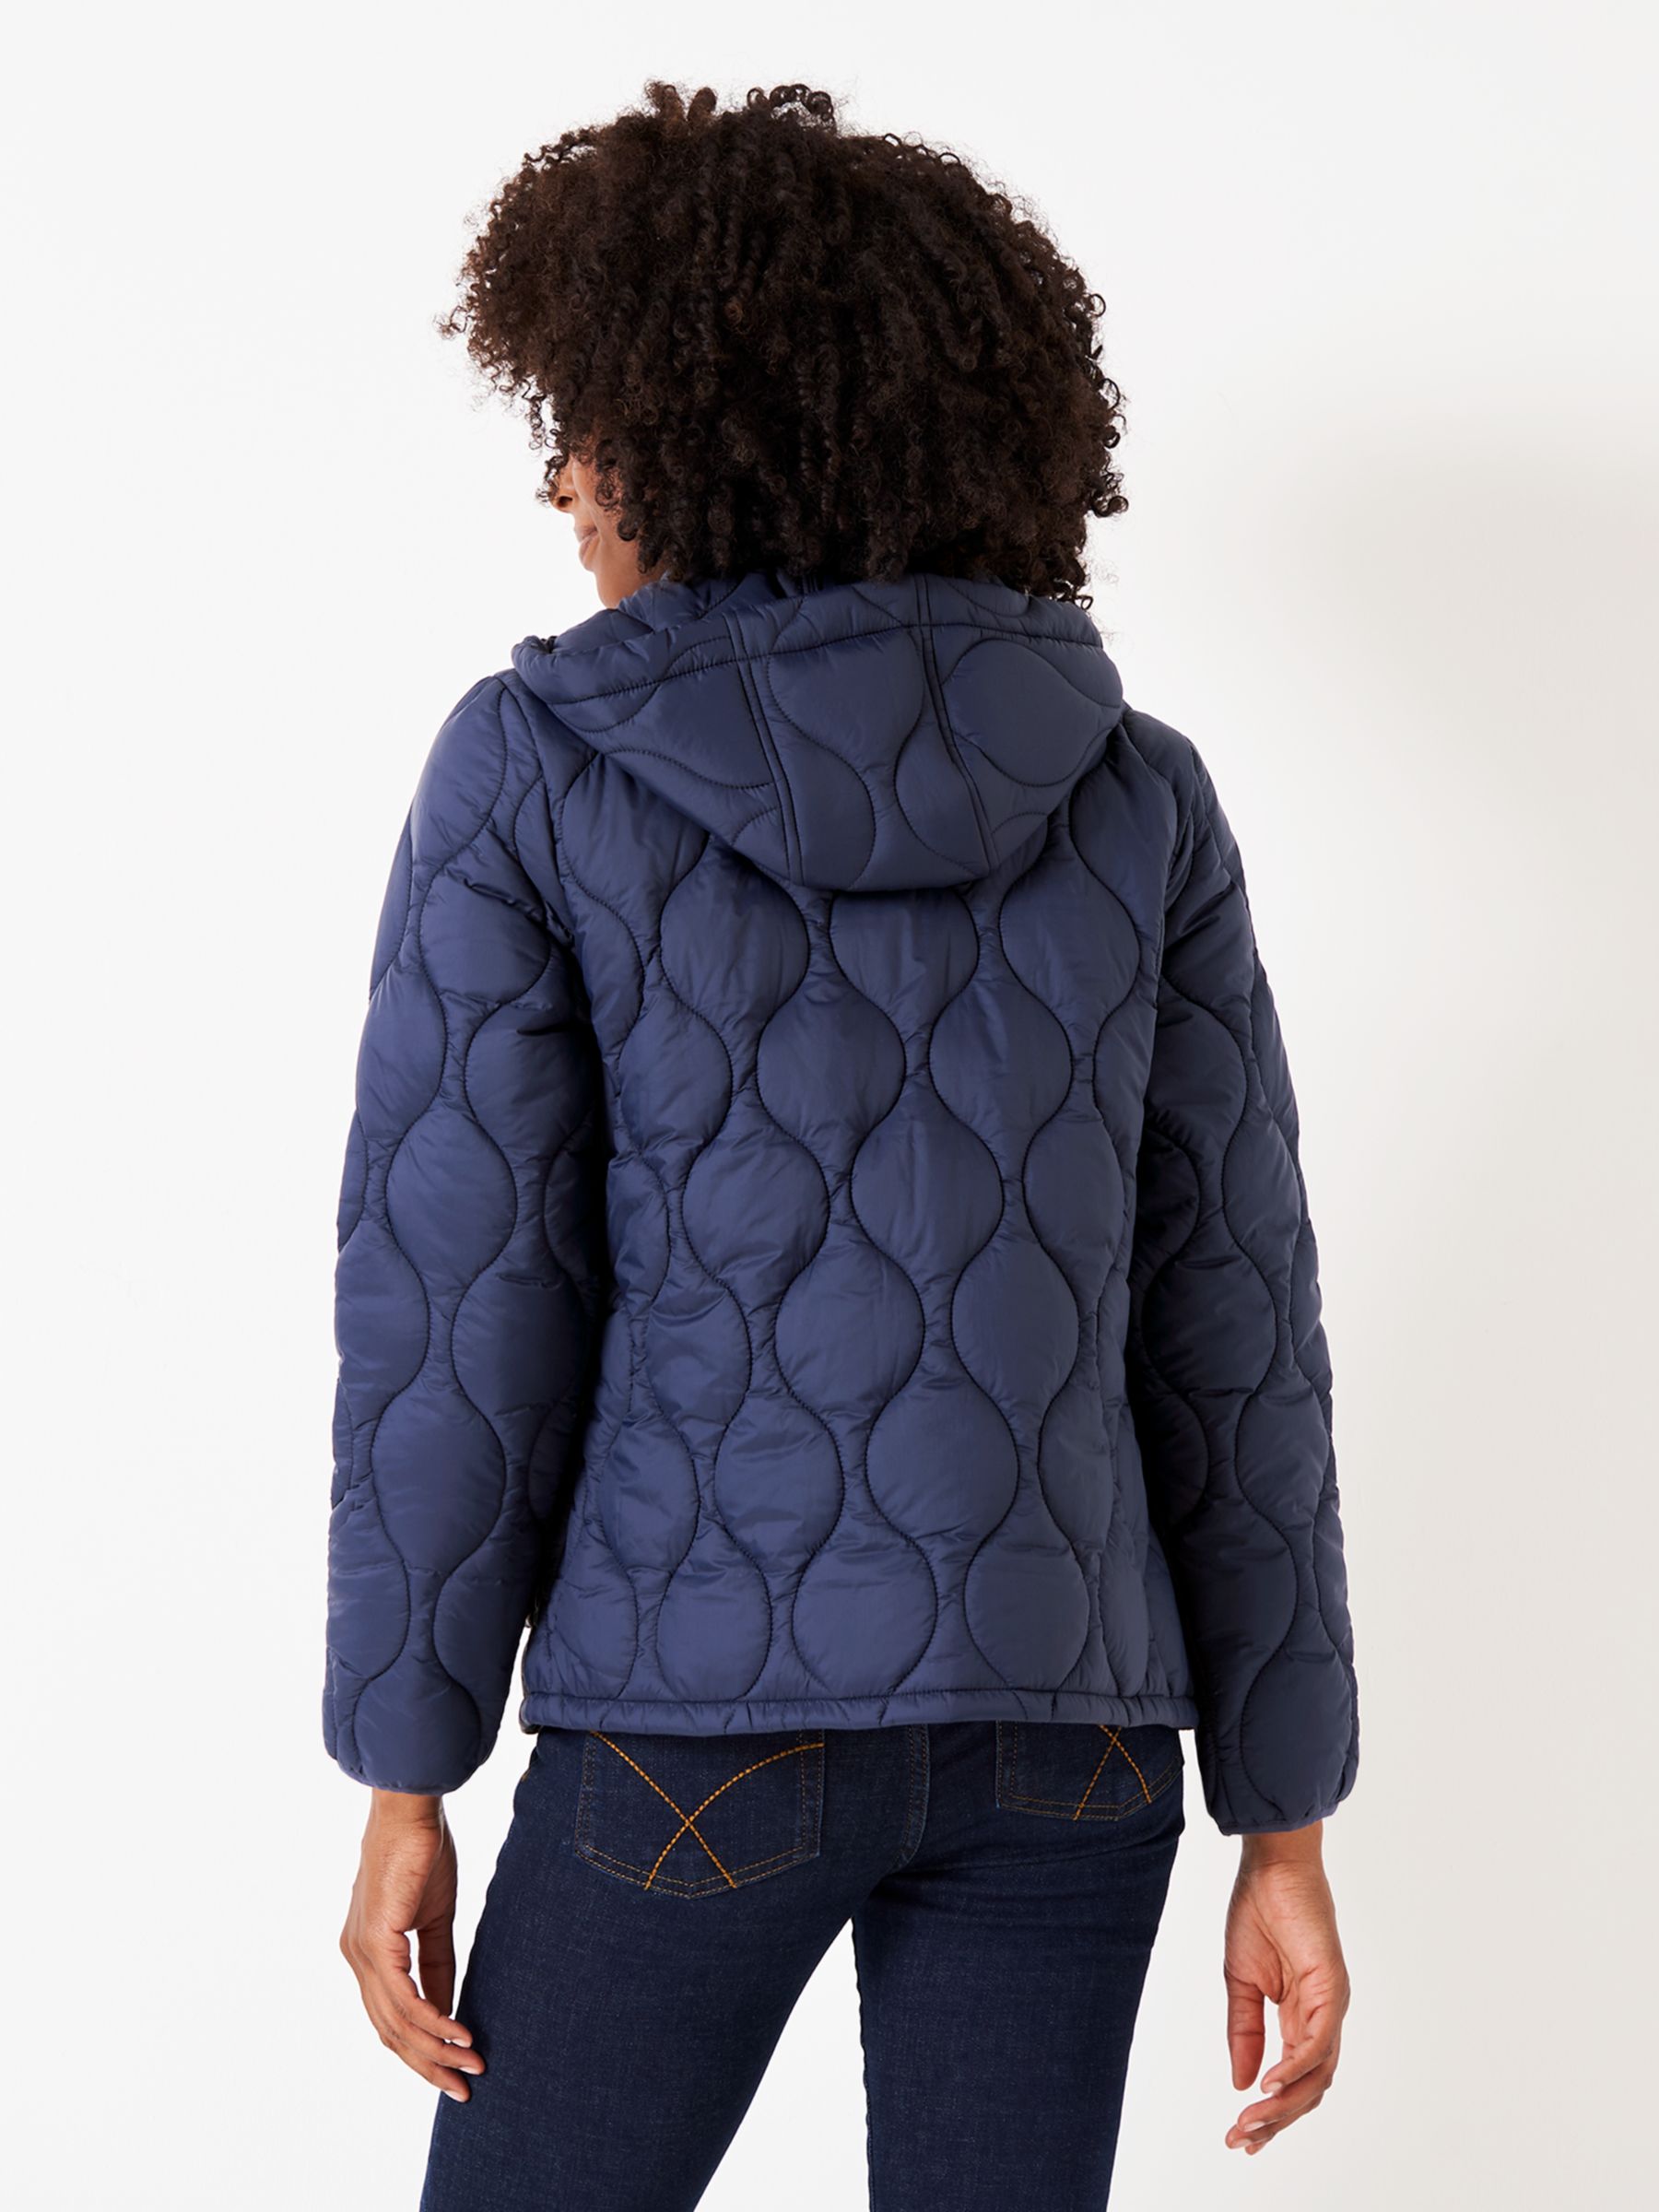 Crew Clothing Lightweight Nylon Quilted Jacket, Navy Blue at John Lewis ...